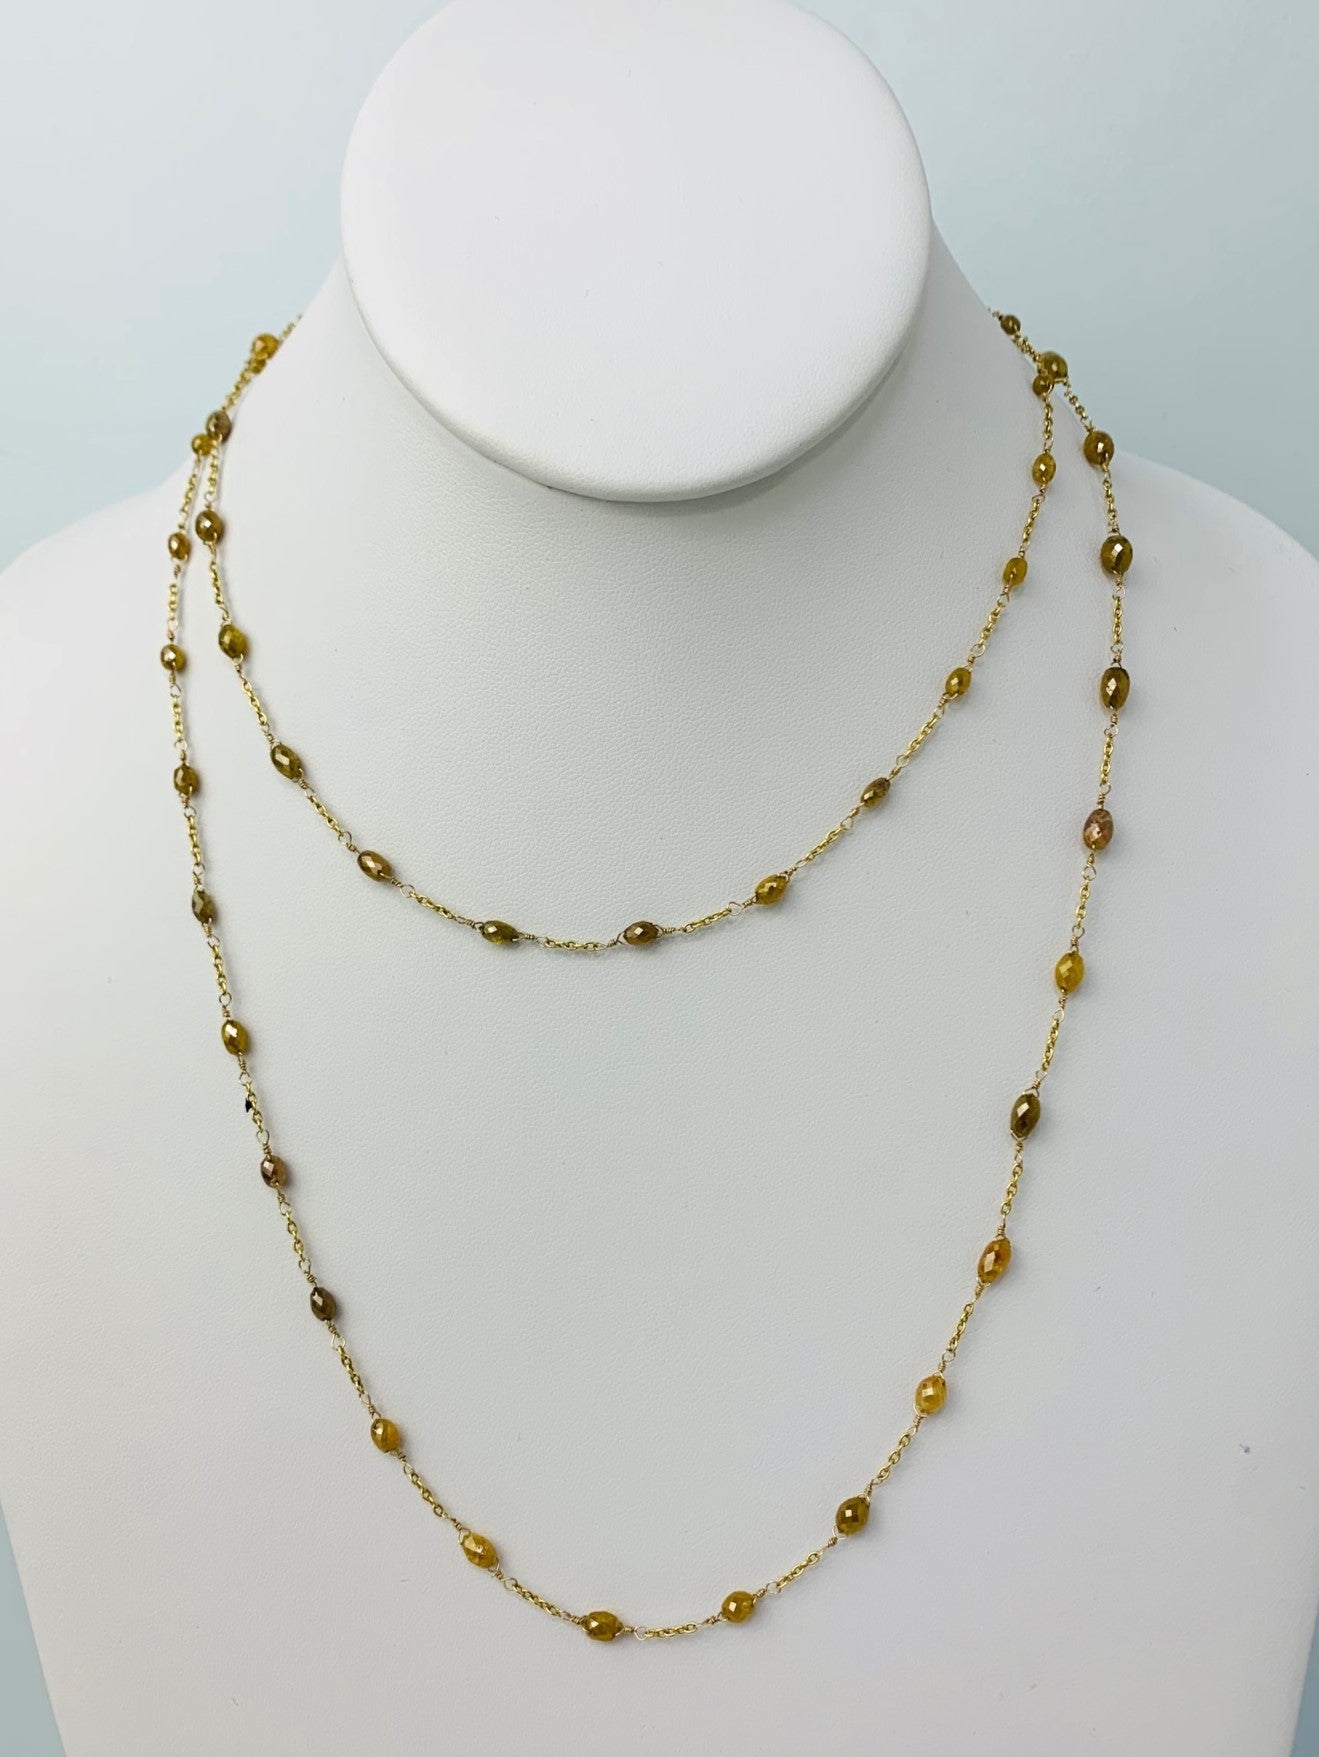 37" Yellow Diamond Station Necklace in 18KY - NCK-279-TNCDIA18Y-YL-37 17.30ctw